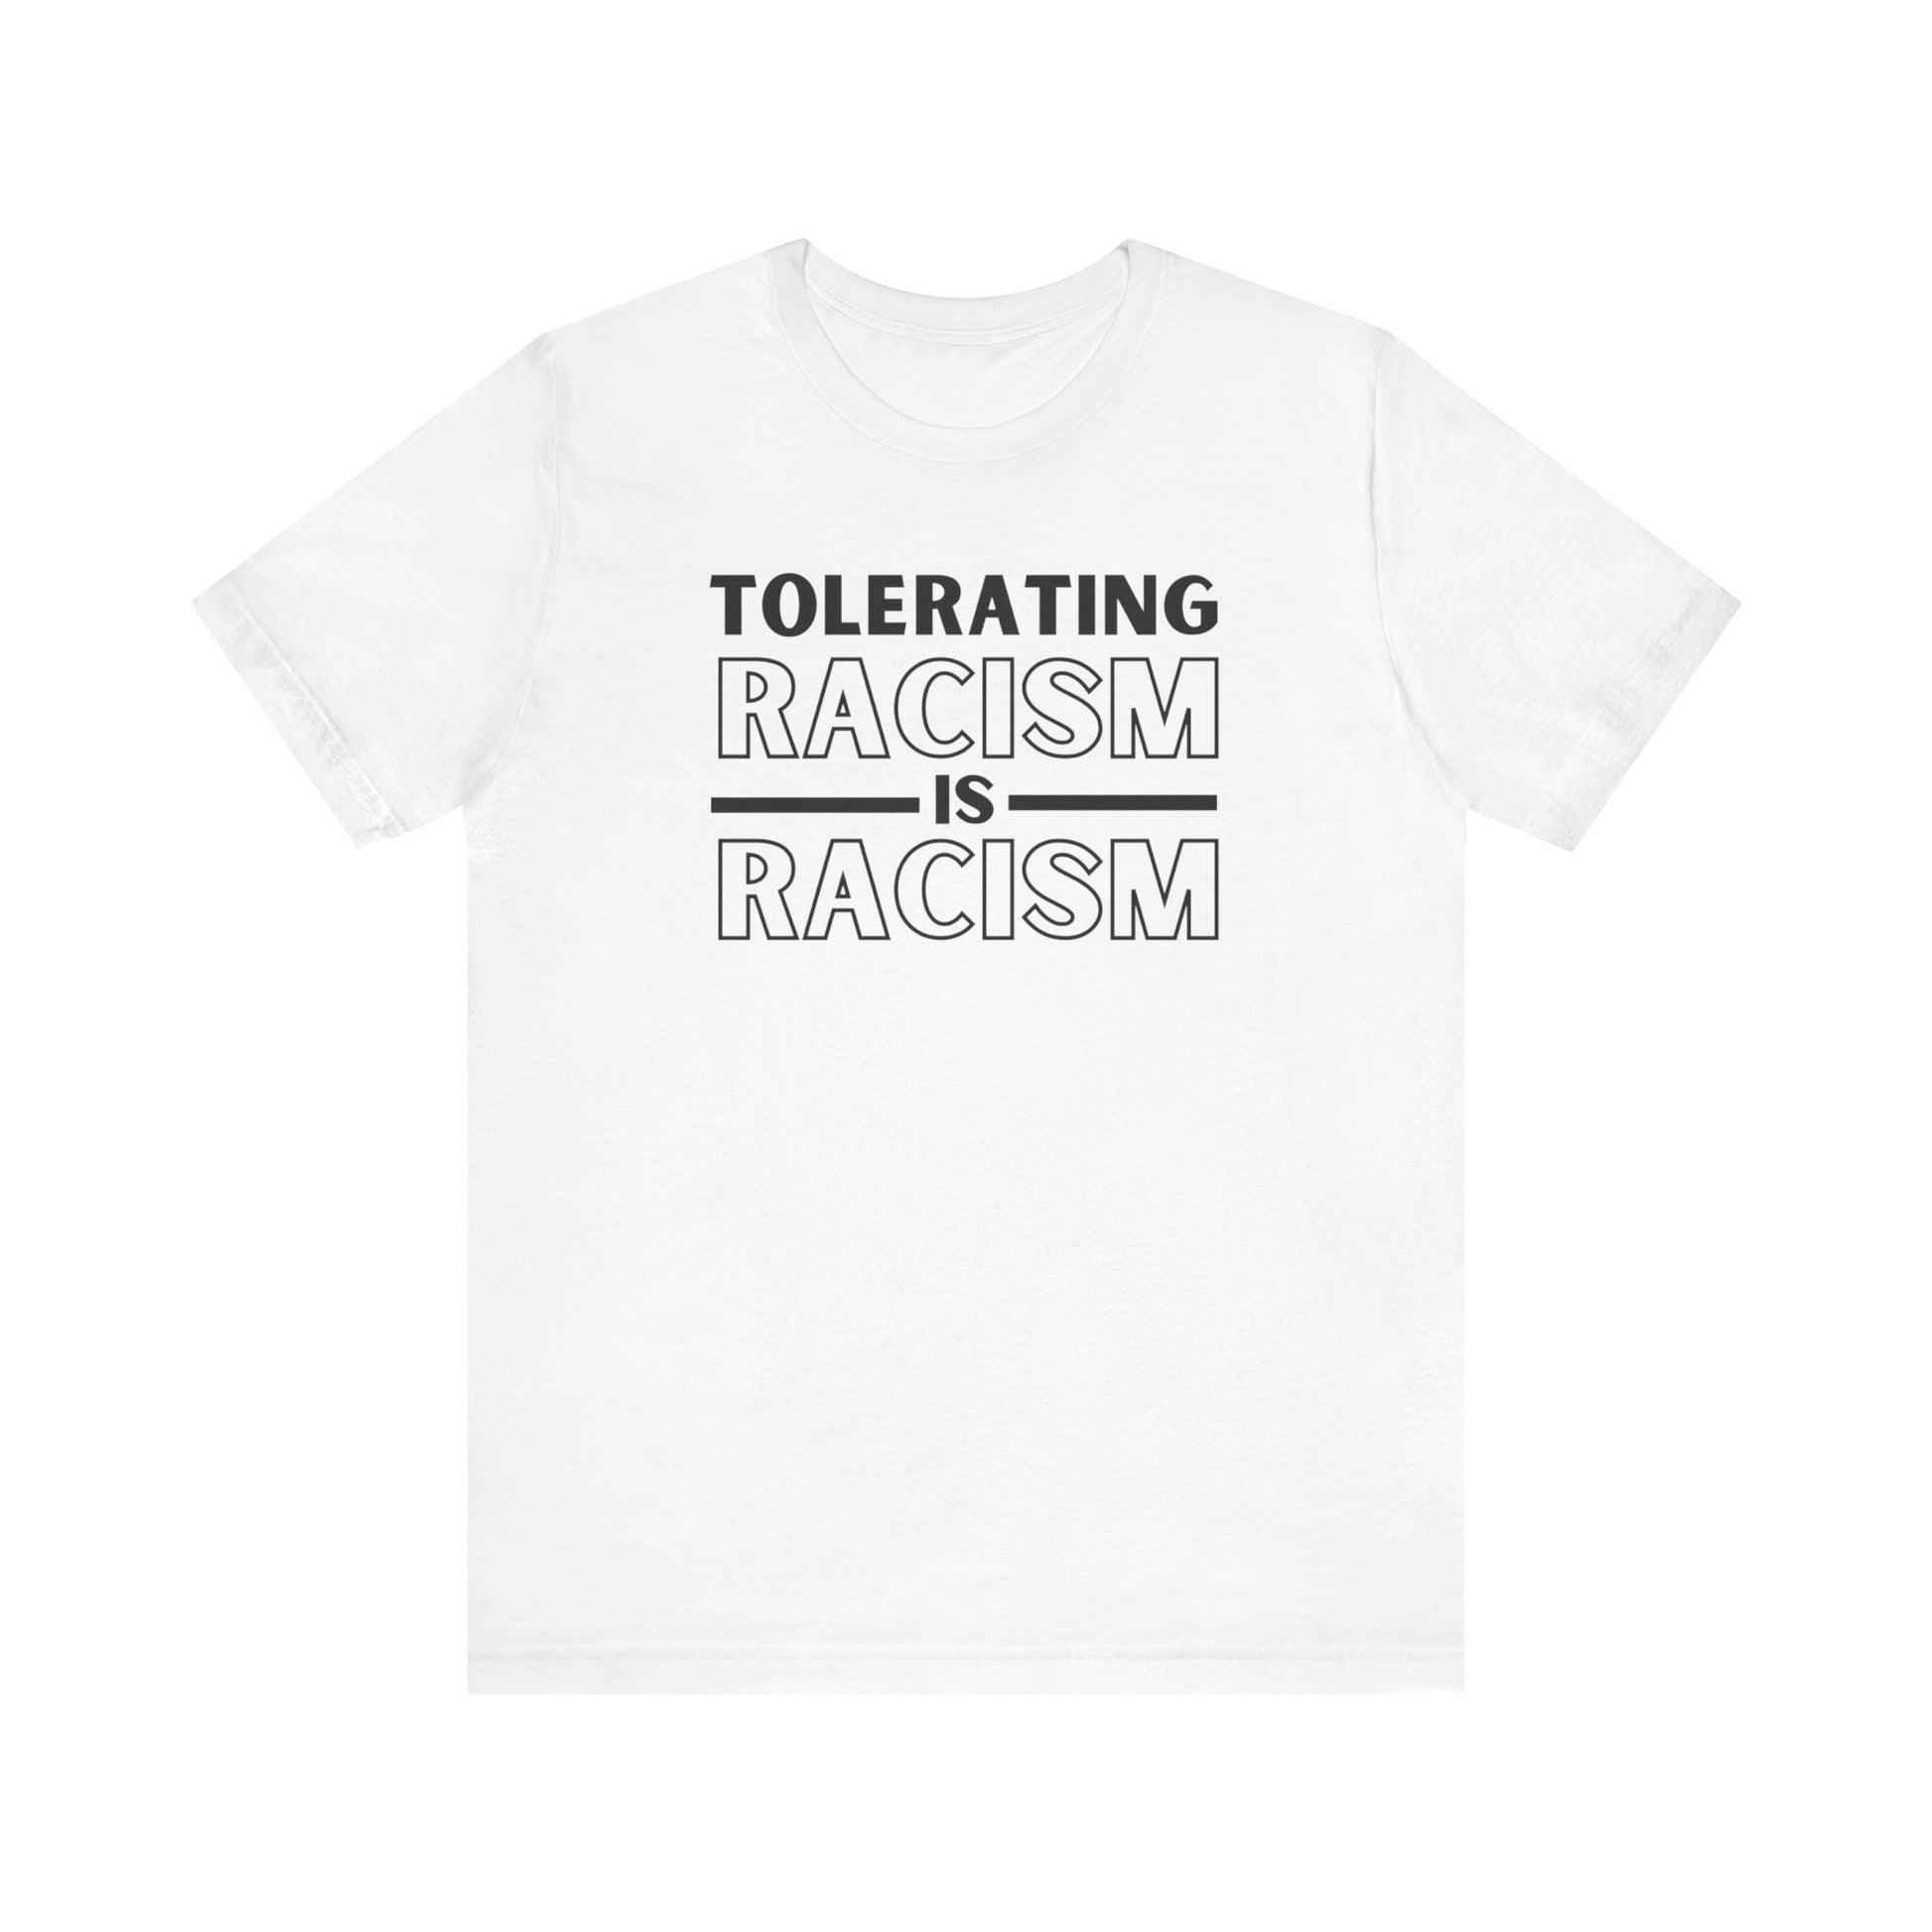 T-shirt to encourage a culture of awareness and action against discrimination - design states "tolerating racism is racism". Bella canvas 3001 t-shirt in white.